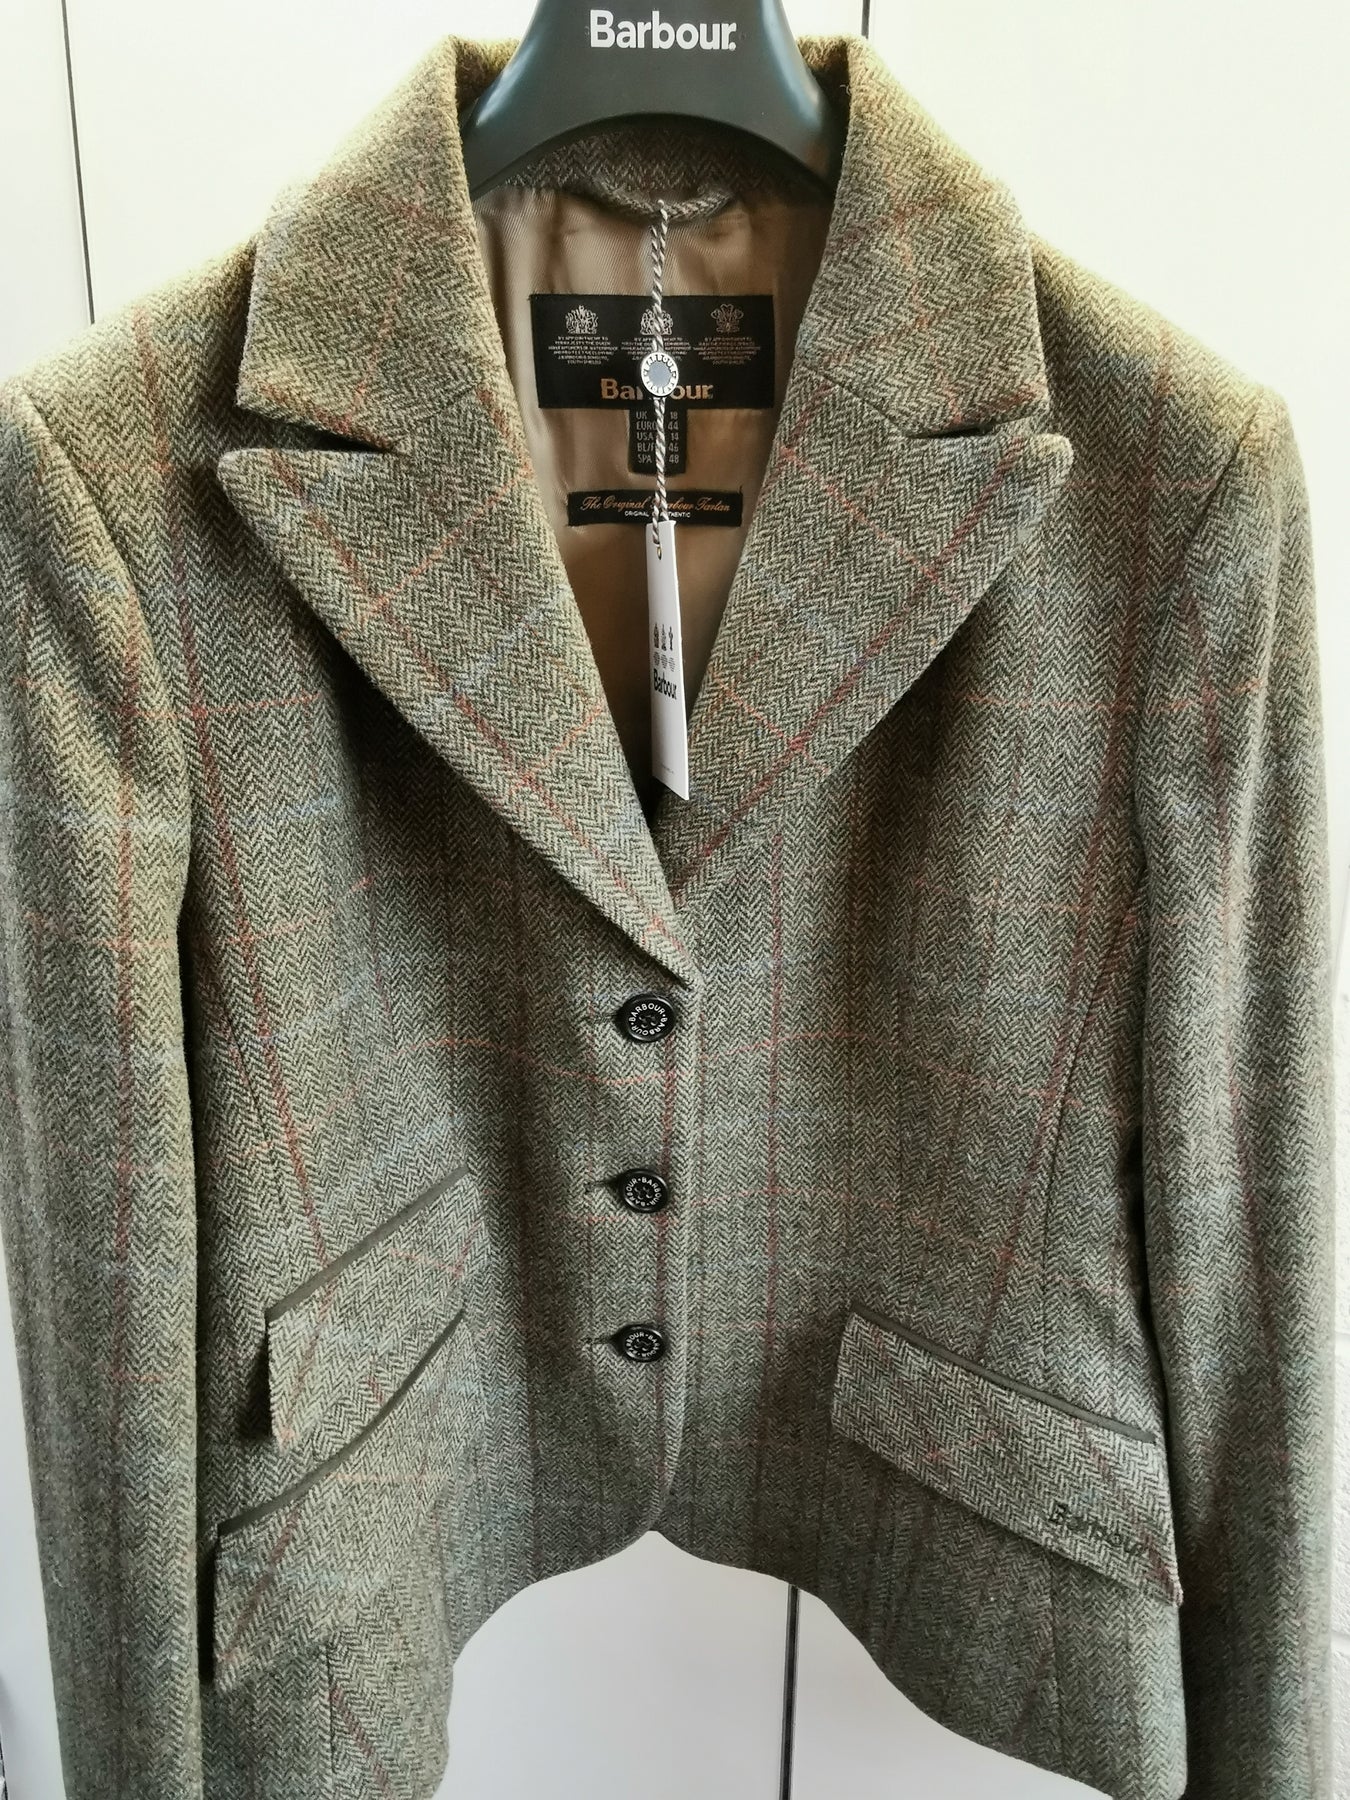 barbour rannerdale tailored jacket